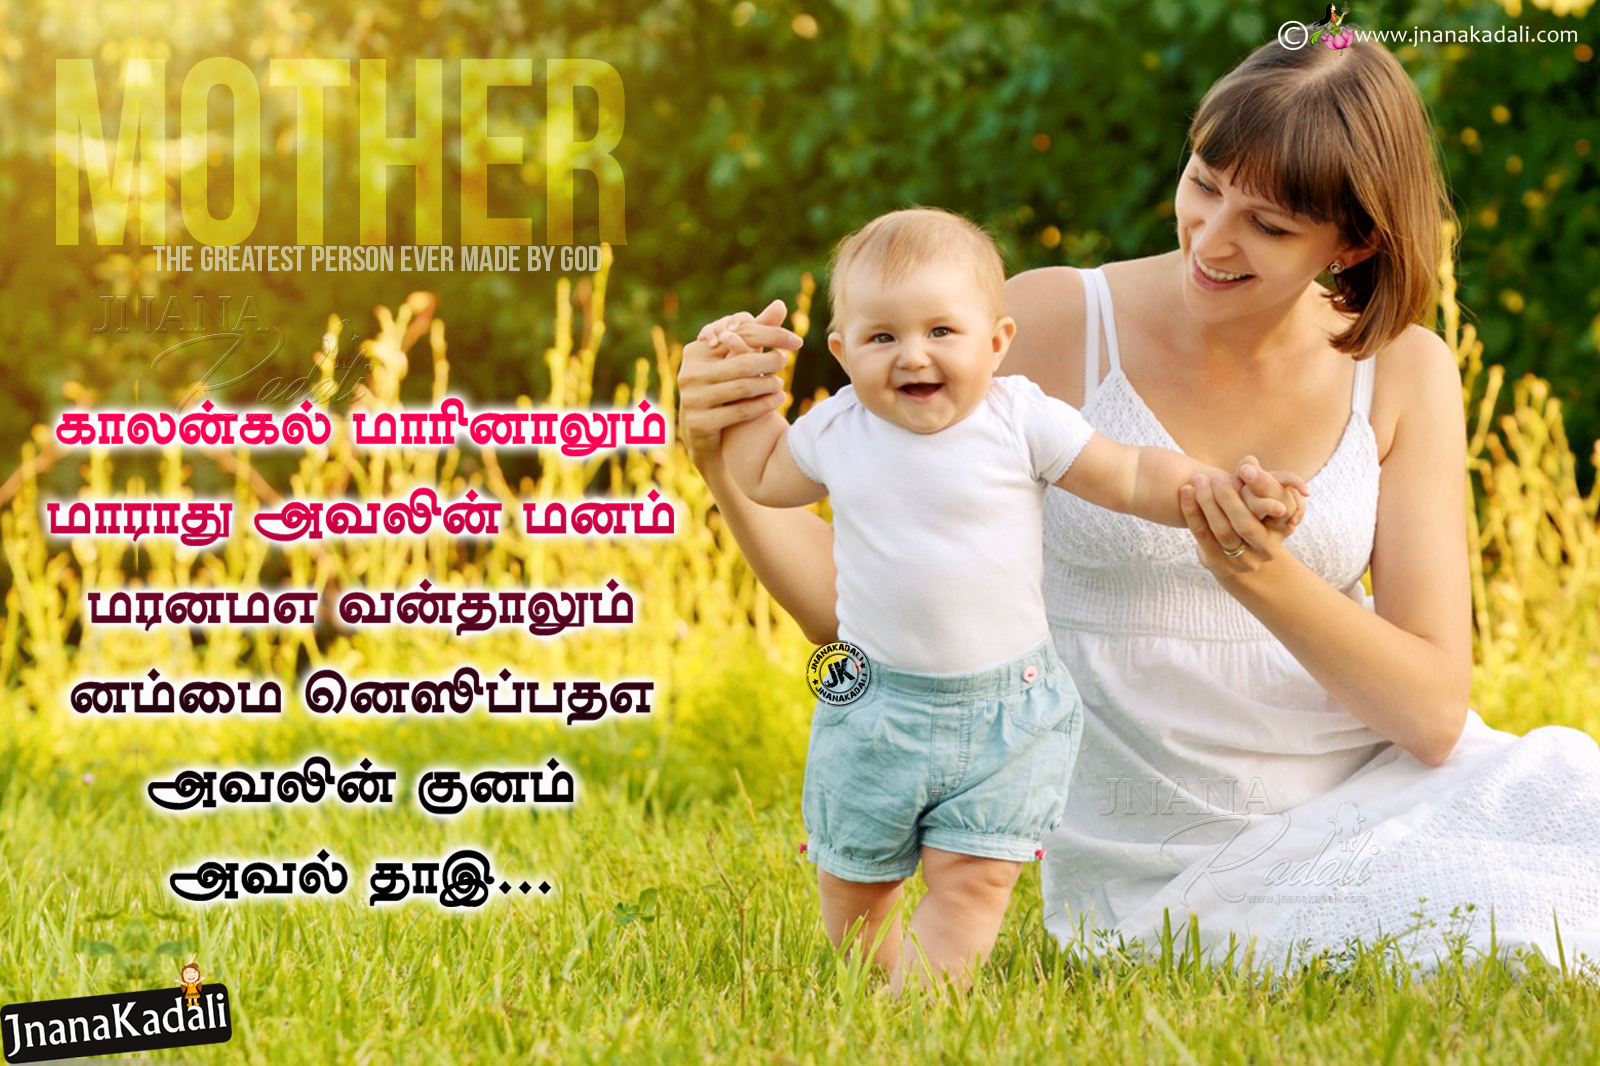 Status about mother. Gentle as a mothers Touch Dreft плакат. Gentle as a mother's Touch. The meaning of mother's Love.